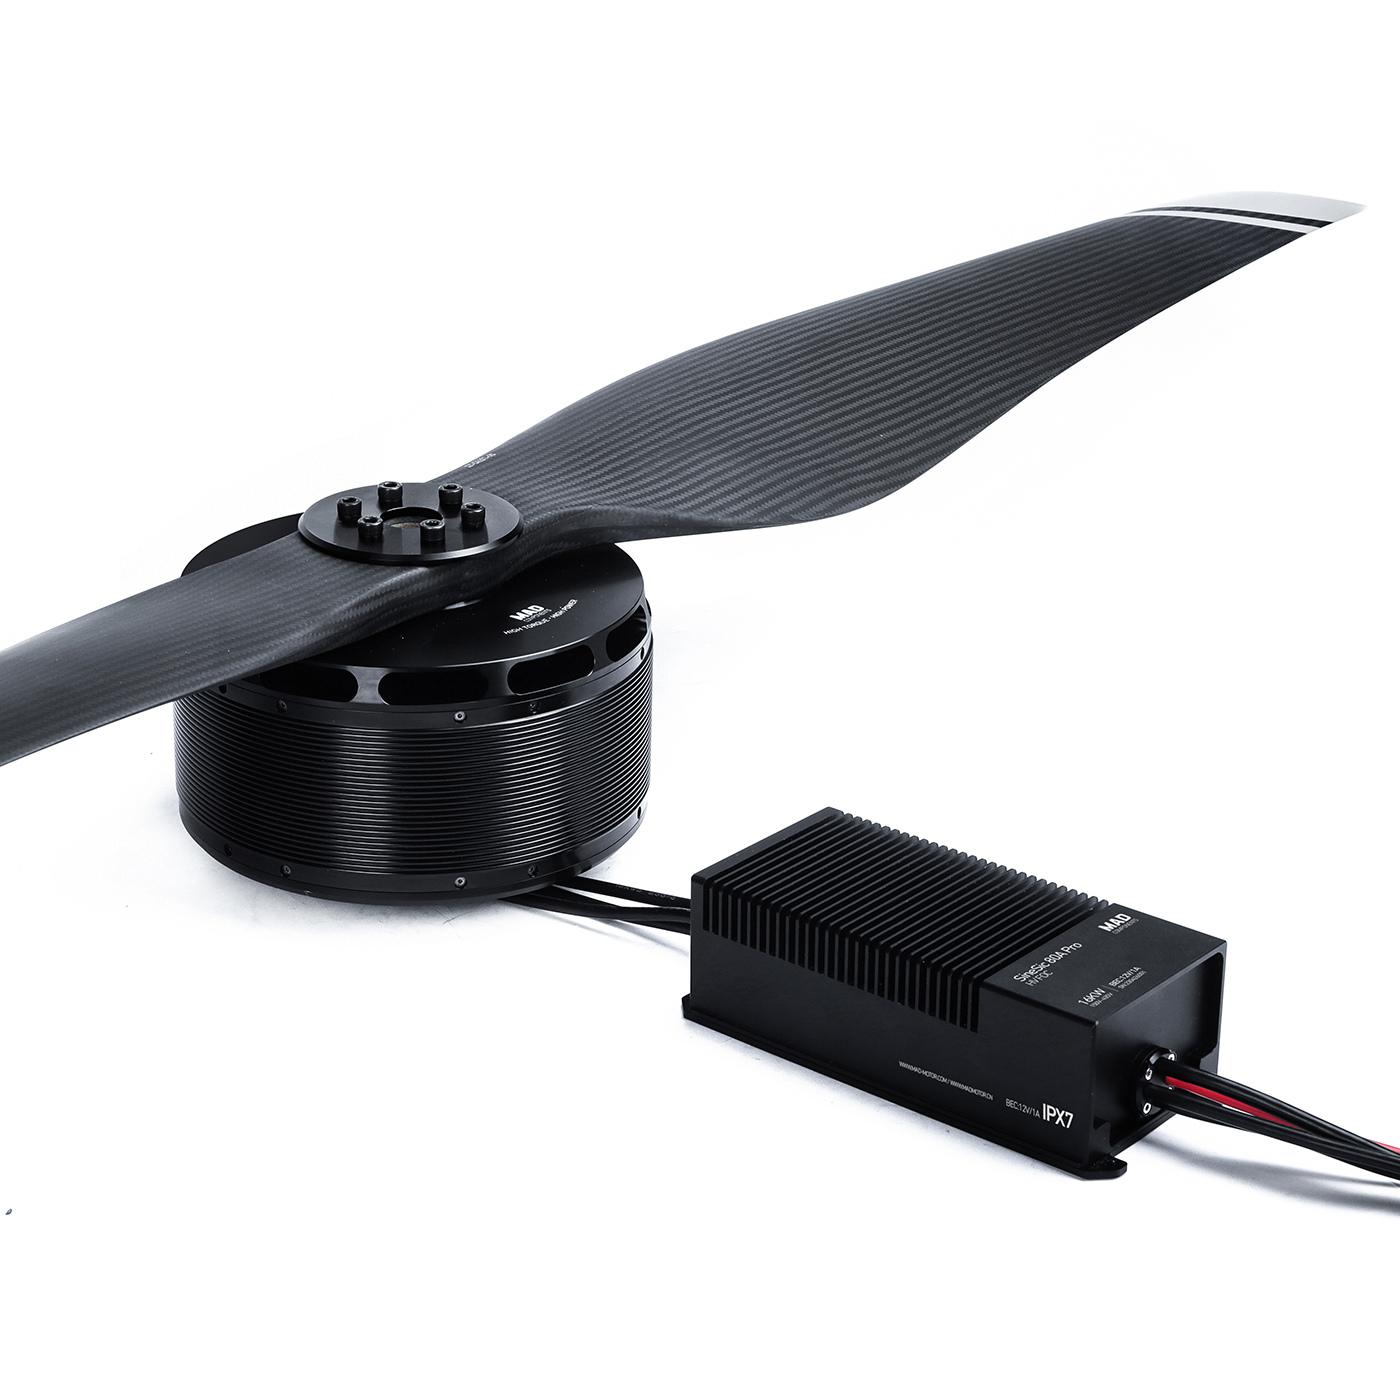 HB60 64X20 MAD Hummingbird electric motor for large-scale multi-rotor/e-VTOL drones capable of carrying heavy loads flying car ,delivery drone,urban mobility